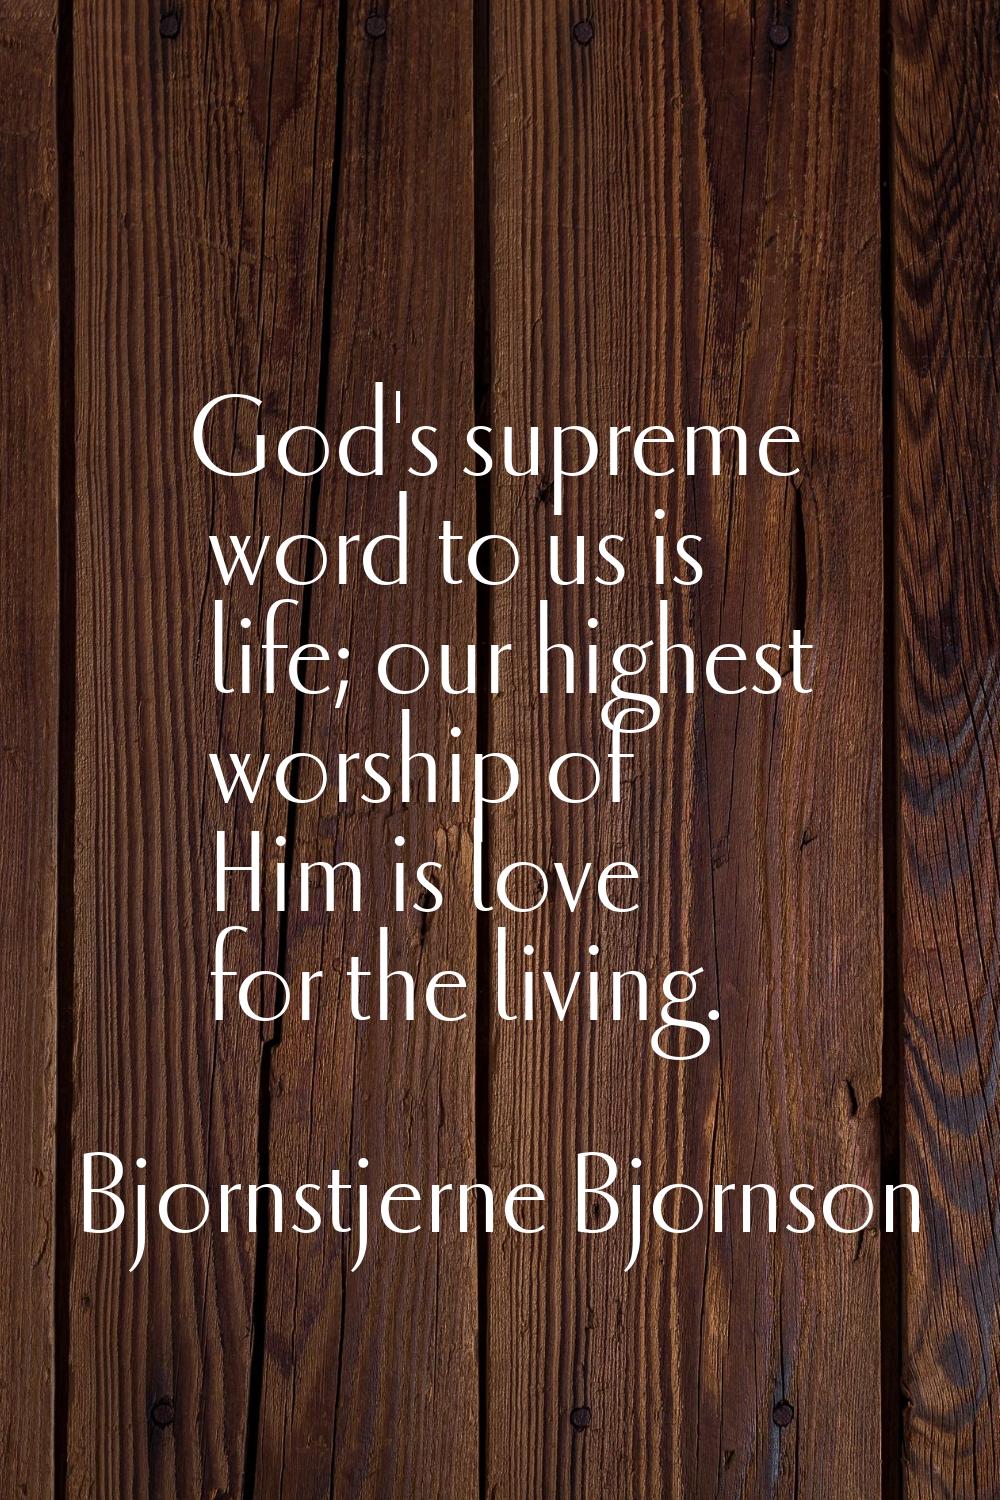 God's supreme word to us is life; our highest worship of Him is love for the living.